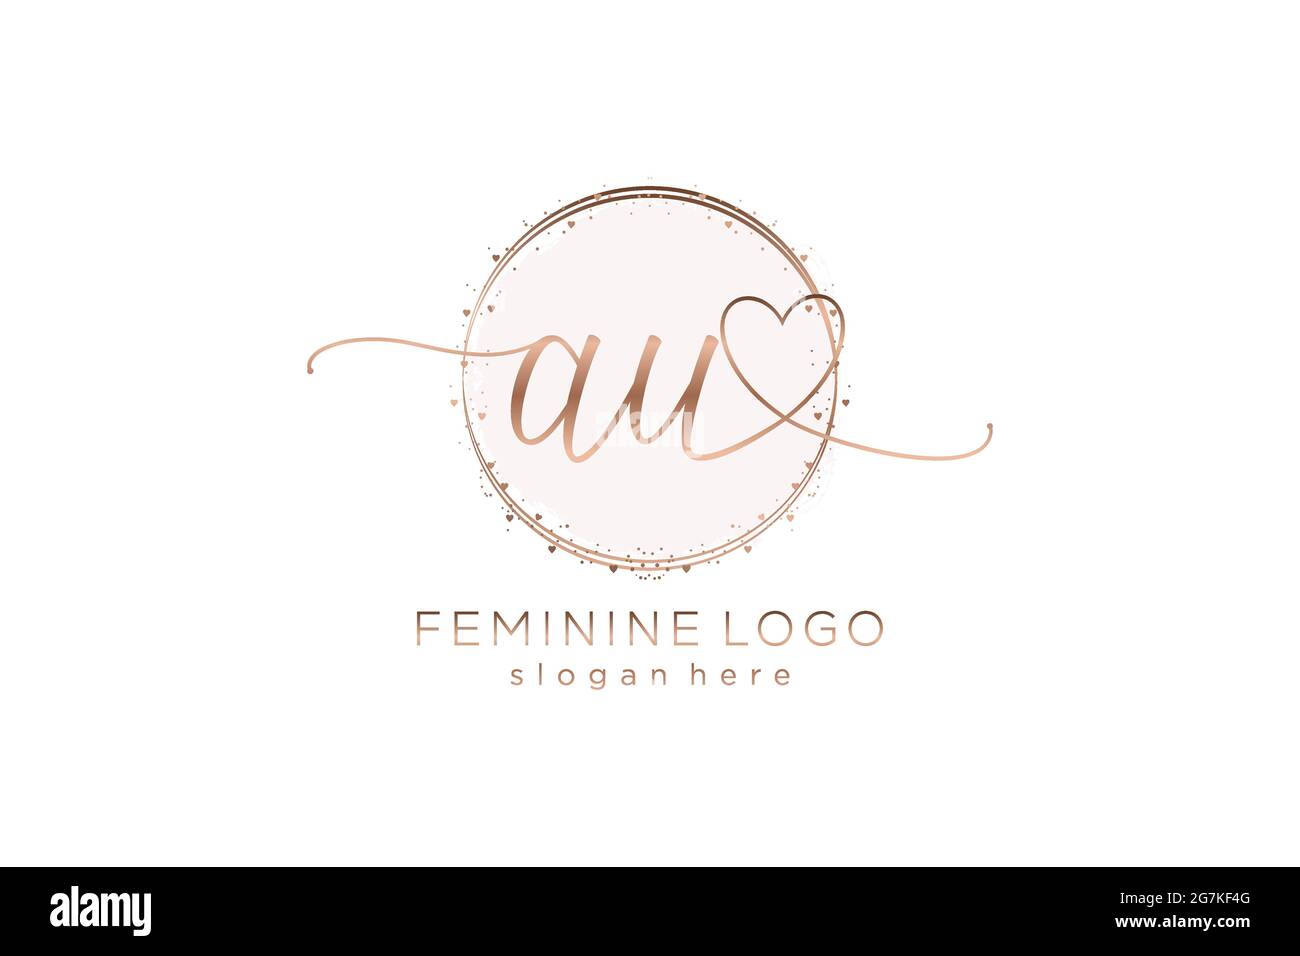 AU handwriting logo with circle template vector logo of initial wedding, fashion, floral and botanical with creative template. Stock Vector